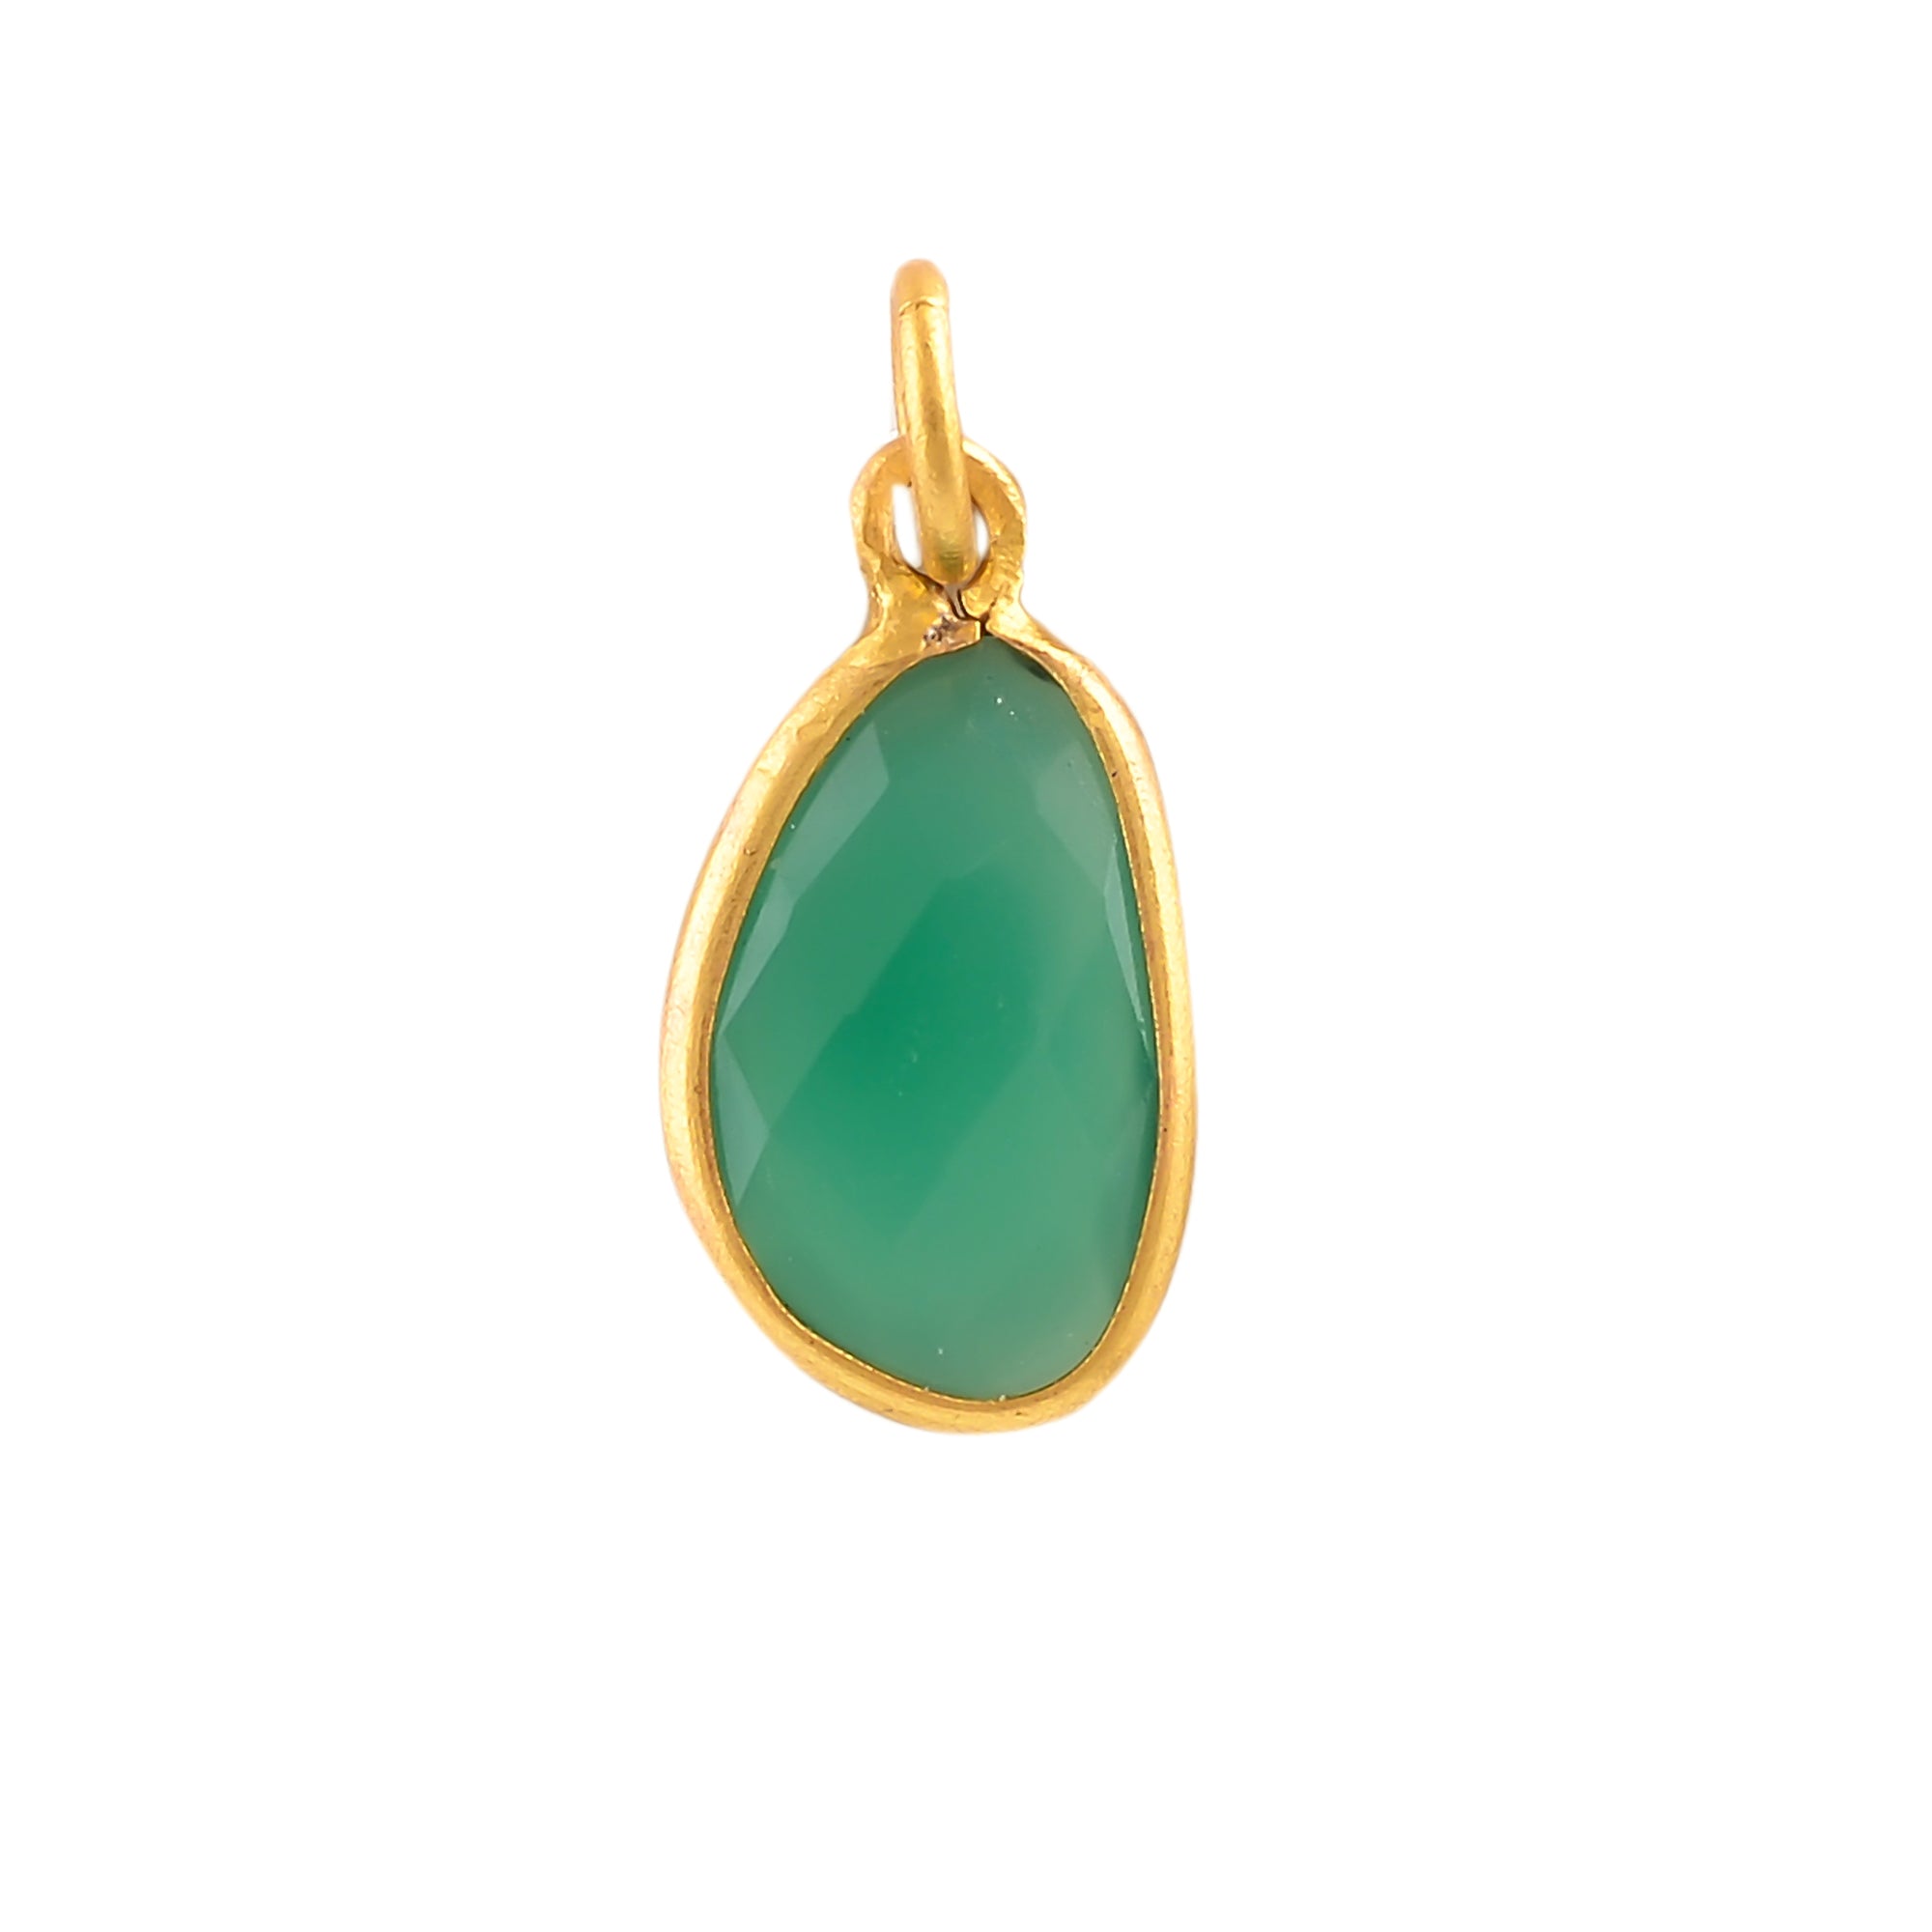 Buy Indian Handmade Silver Gold Plated Green Onyx Pendant